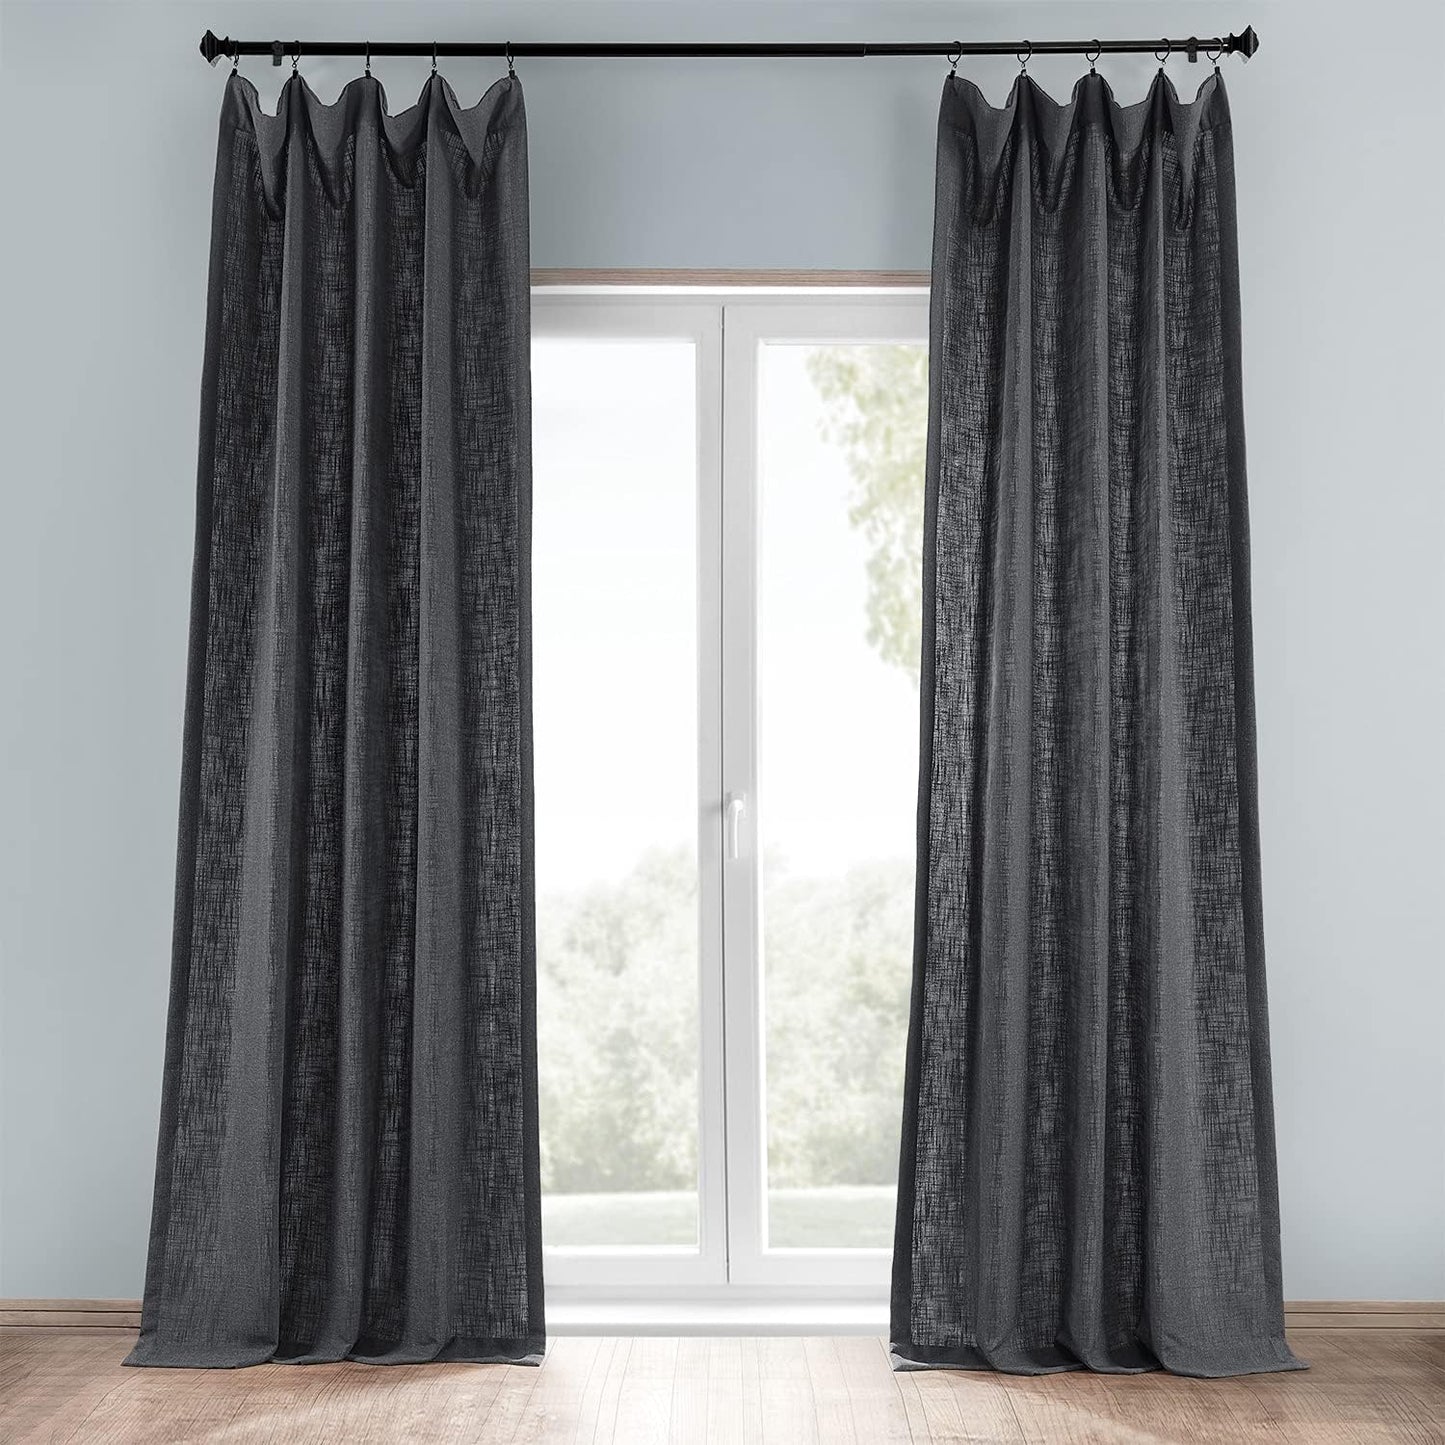 HPD Half Price Drapes Semi Sheer Faux Linen Curtains for Bedroom 96 Inches Long Light Filtering Living Room Window Curtain (1 Panel), 50W X 96L, Rice White  EFF Slate Grey 50W X 120L 